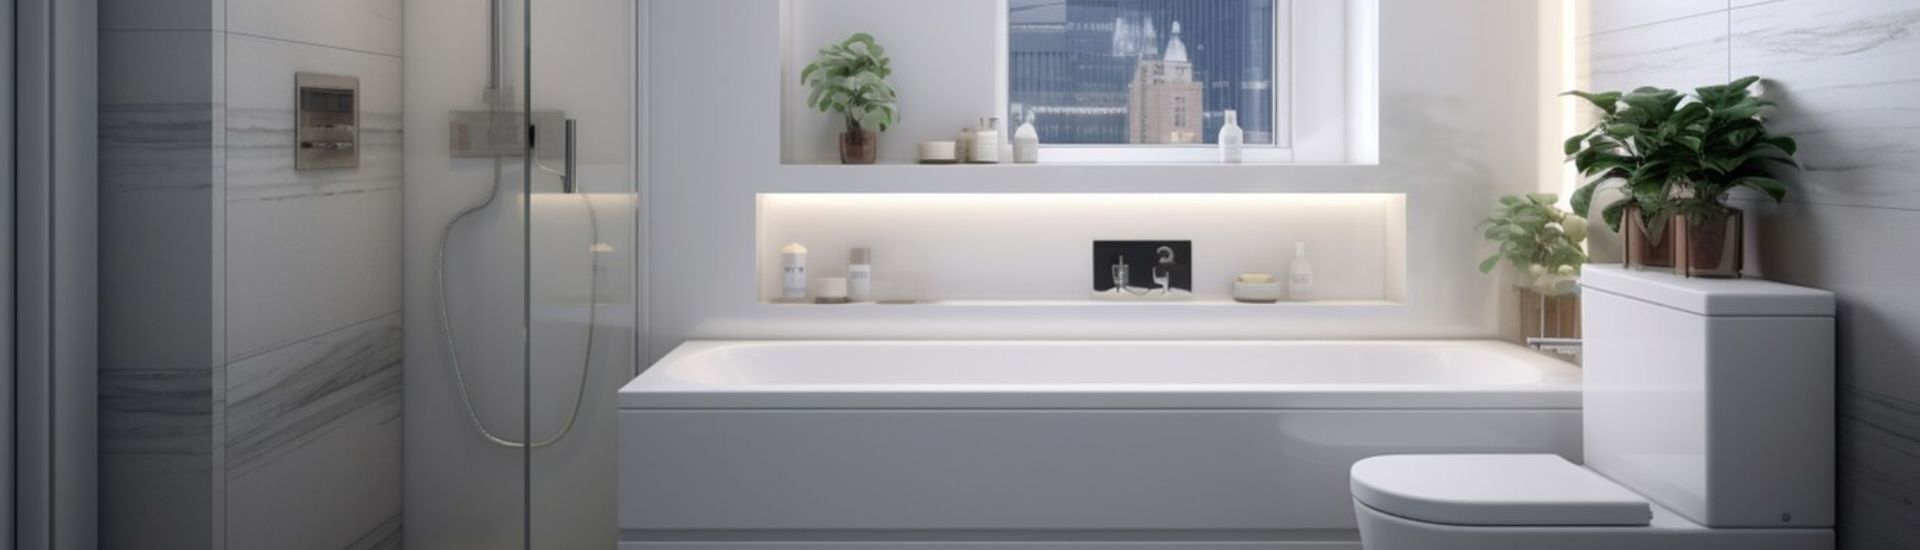 Small Space, Big Impact: 6 Creative Solutions for Your Bathroom Renovation with RJG Group